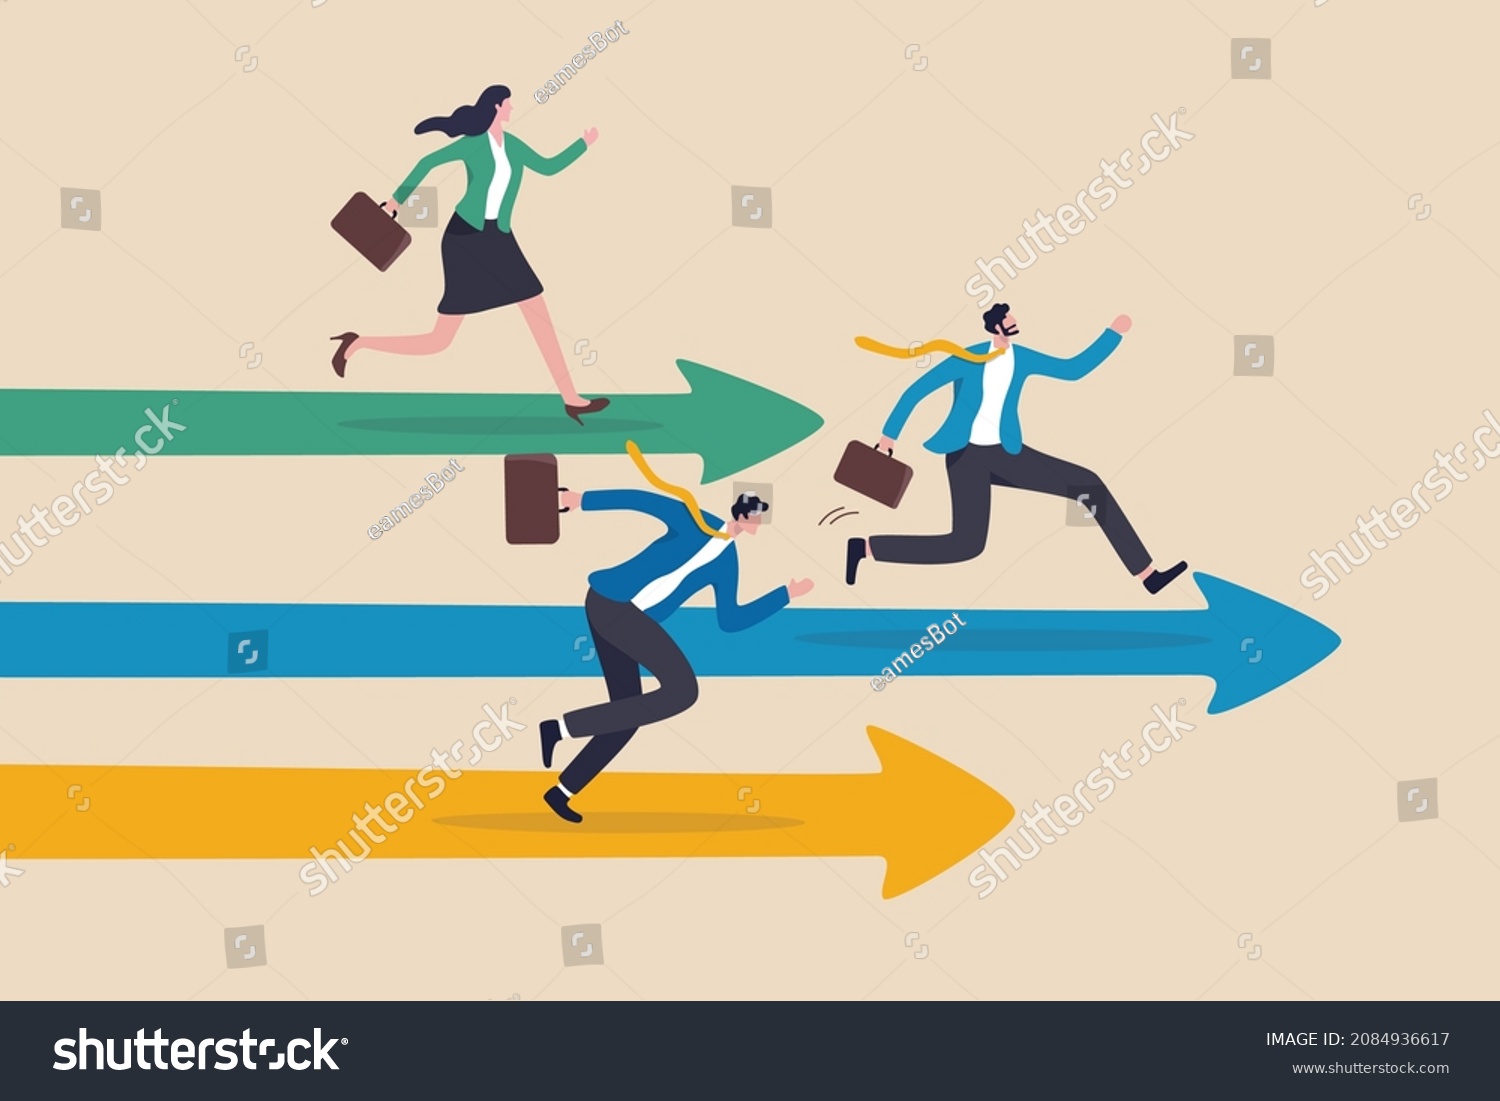 Business competition, contest or rivalry against competitors to increase sales for victory, performance compare to other employees concept, businessman and woman compete running on arrow racetrack. #2084936617